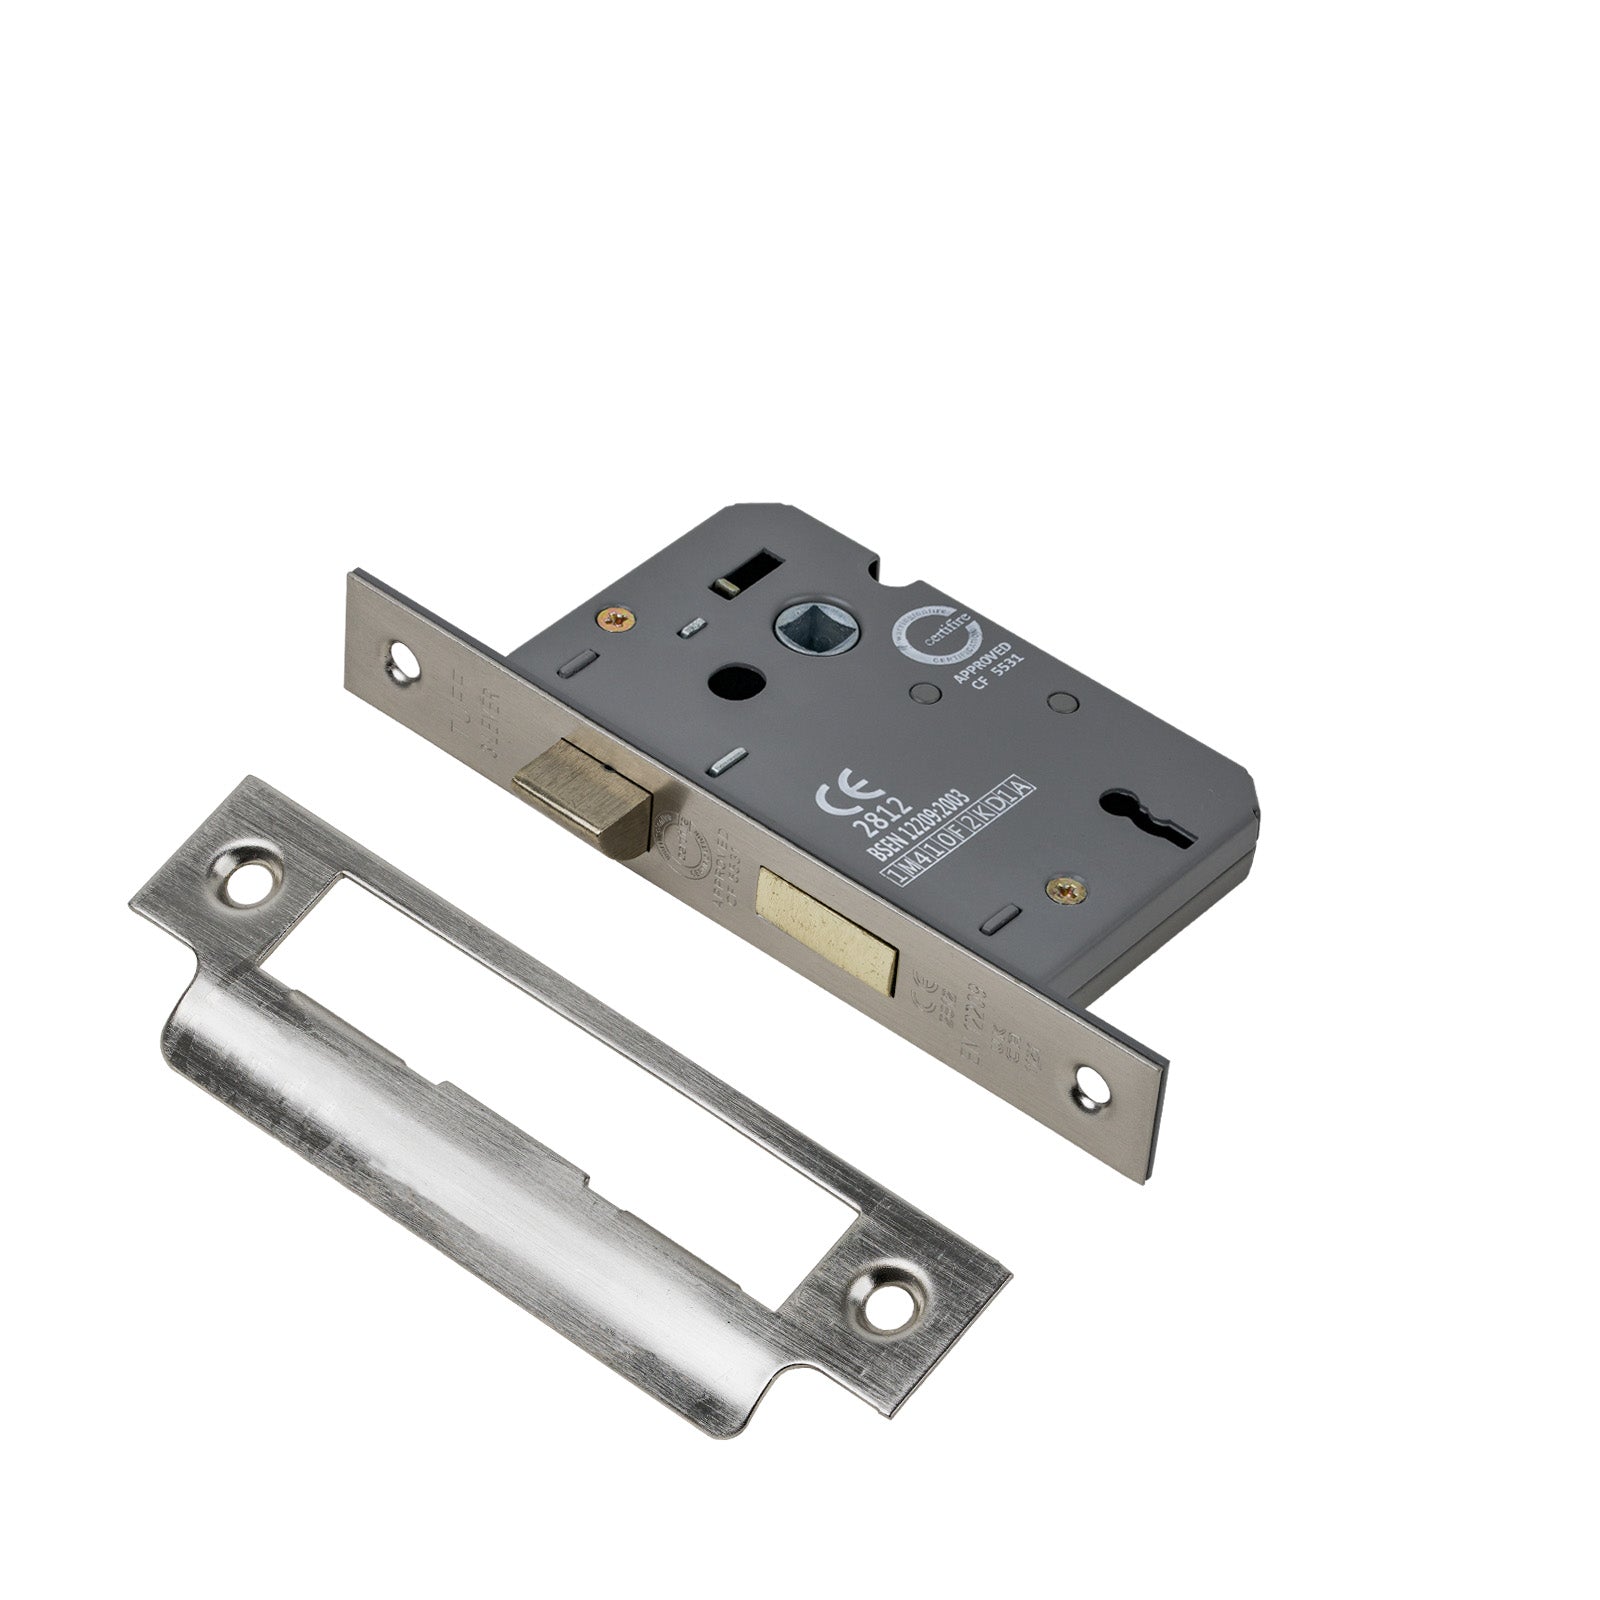 SHOW 3 Lever Sash Lock - 2.5 Inch with Nickel finished forend and striker plate